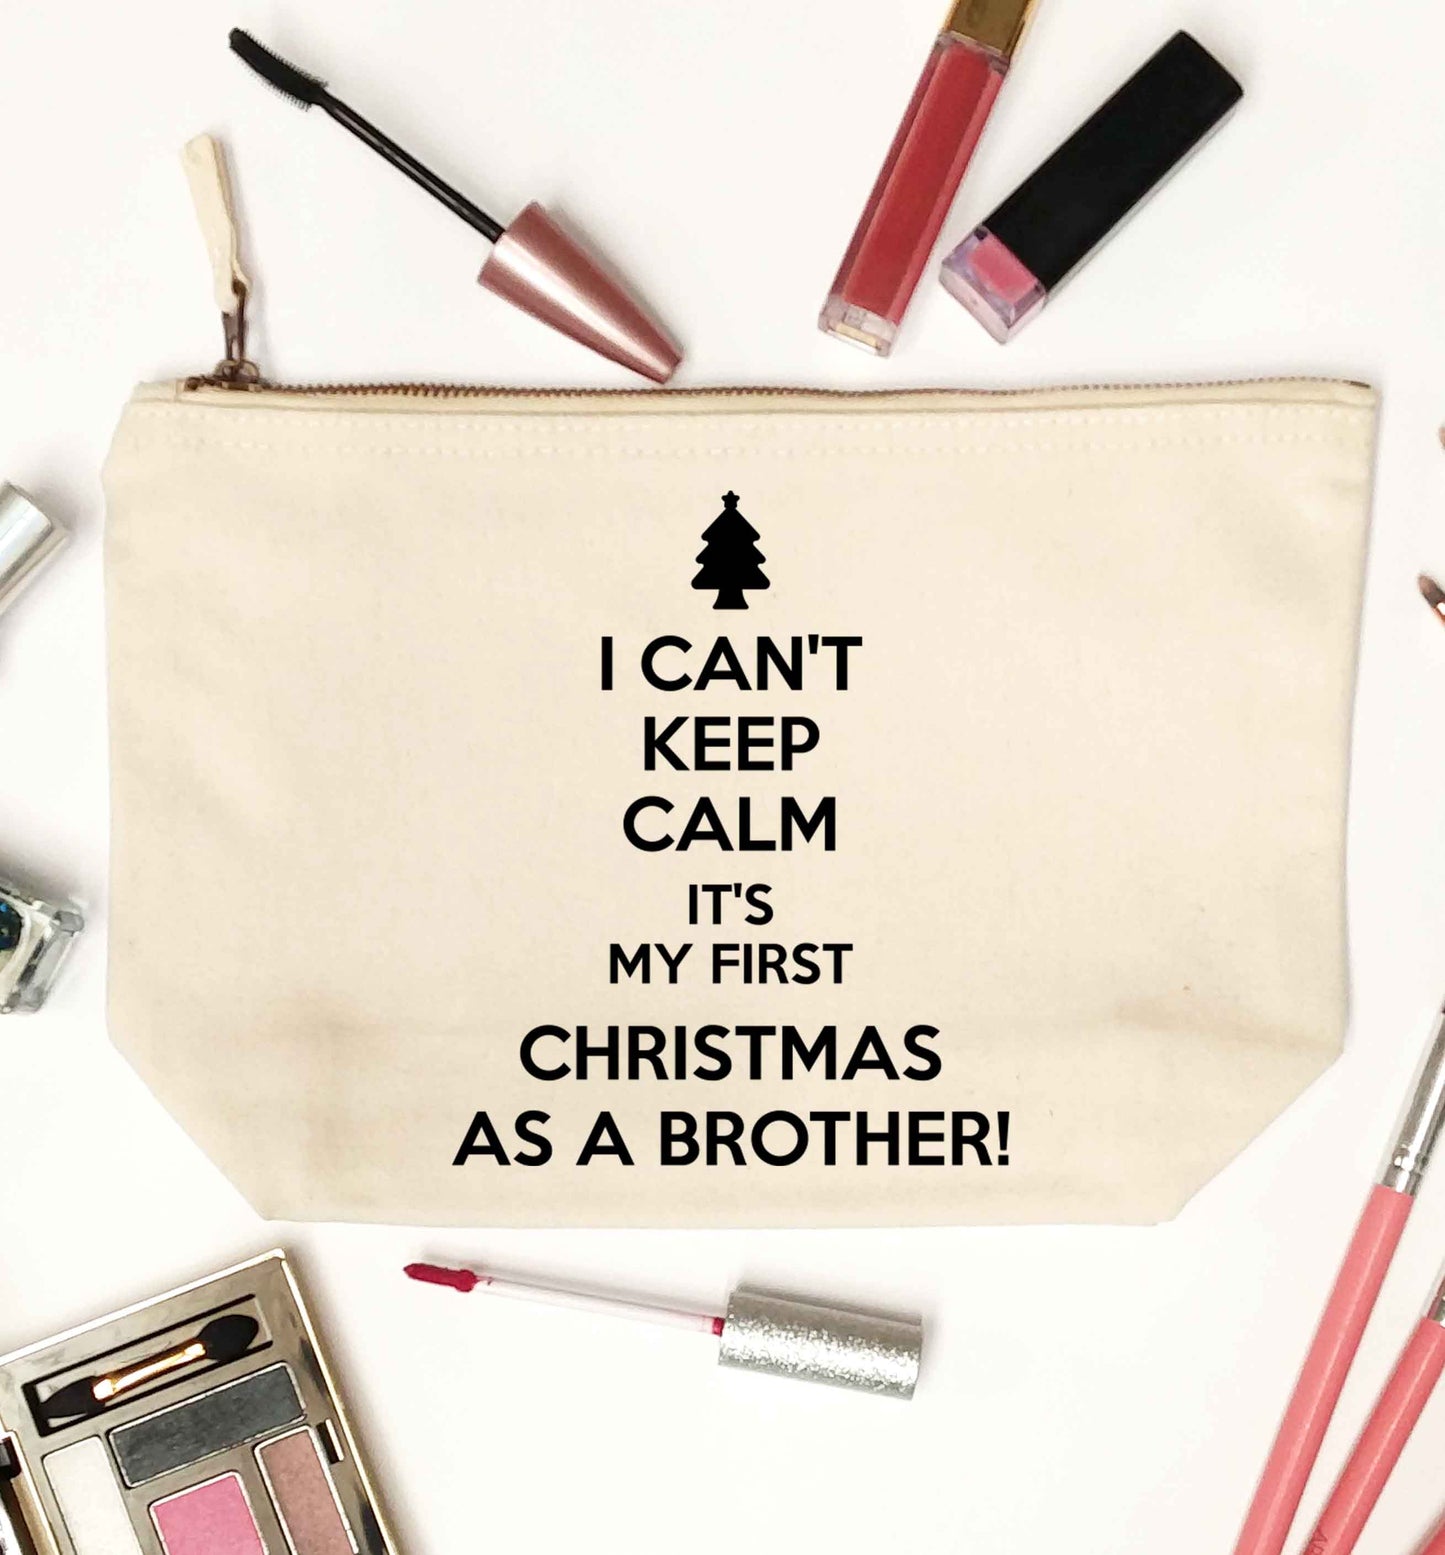 I can't keep calm it's my first Christmas as a brother! natural makeup bag